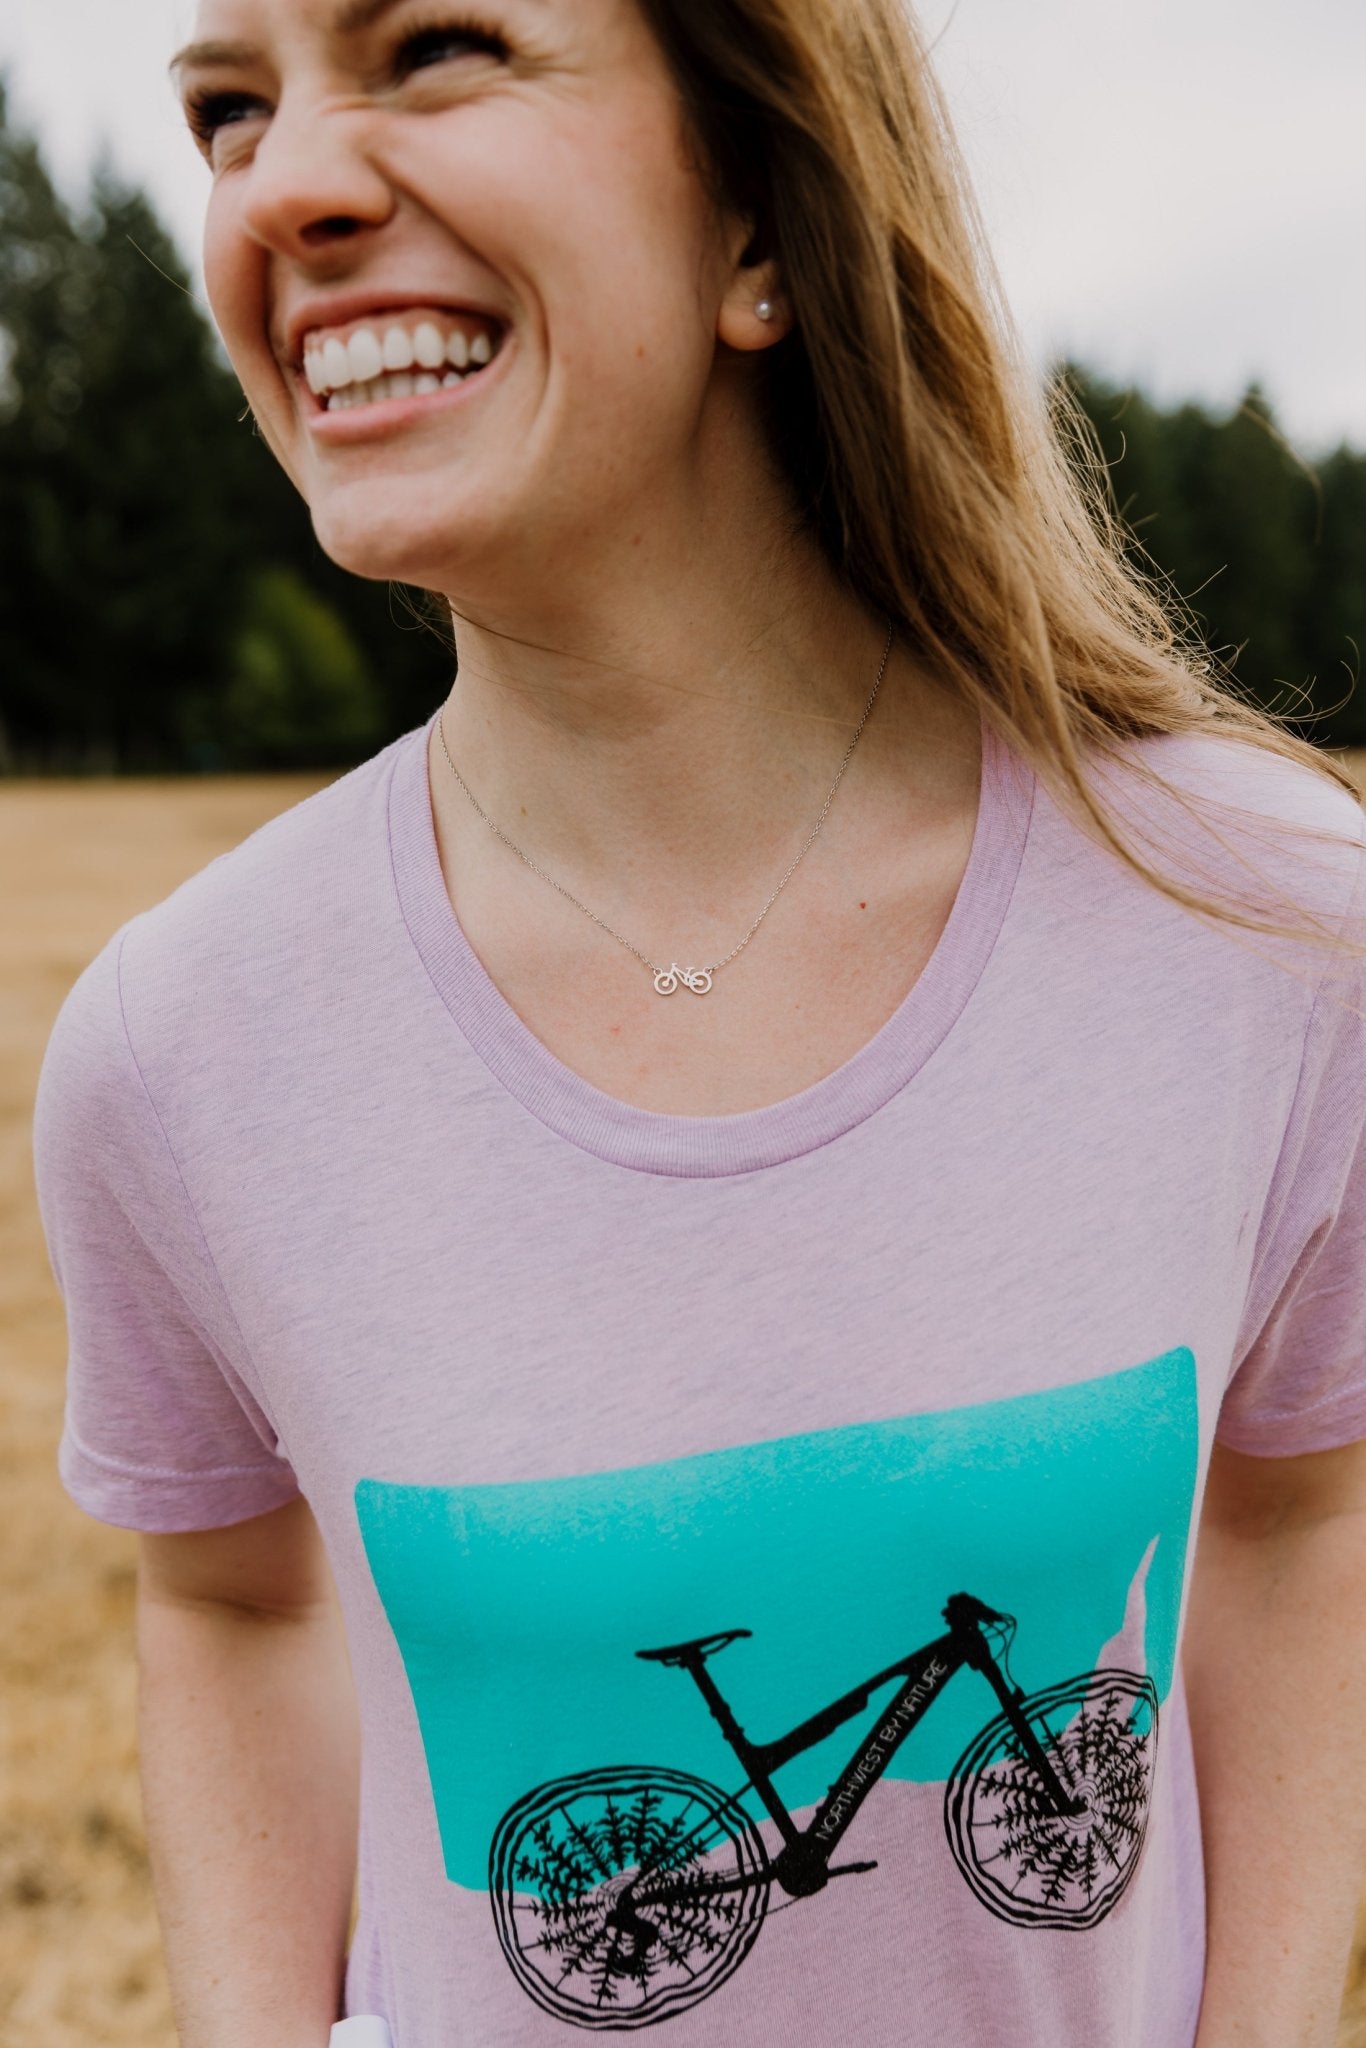 happy model wearing bike t-shirt and silver bike necklace